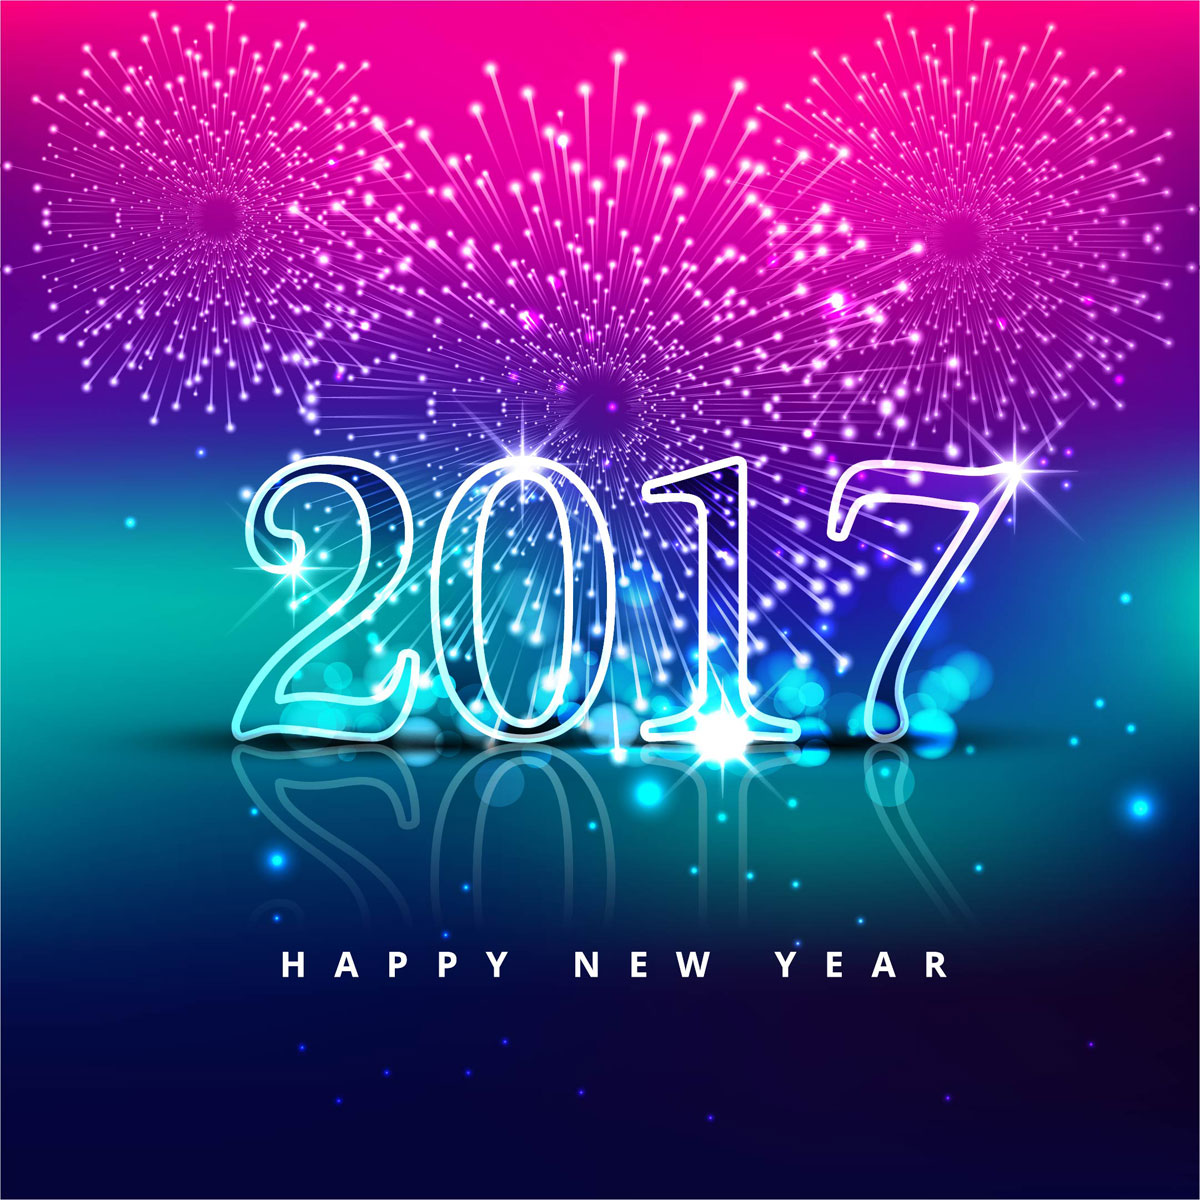 New Year 2017 Backgrounds, Compatible - PC, Mobile, Gadgets| 1200x1200 px